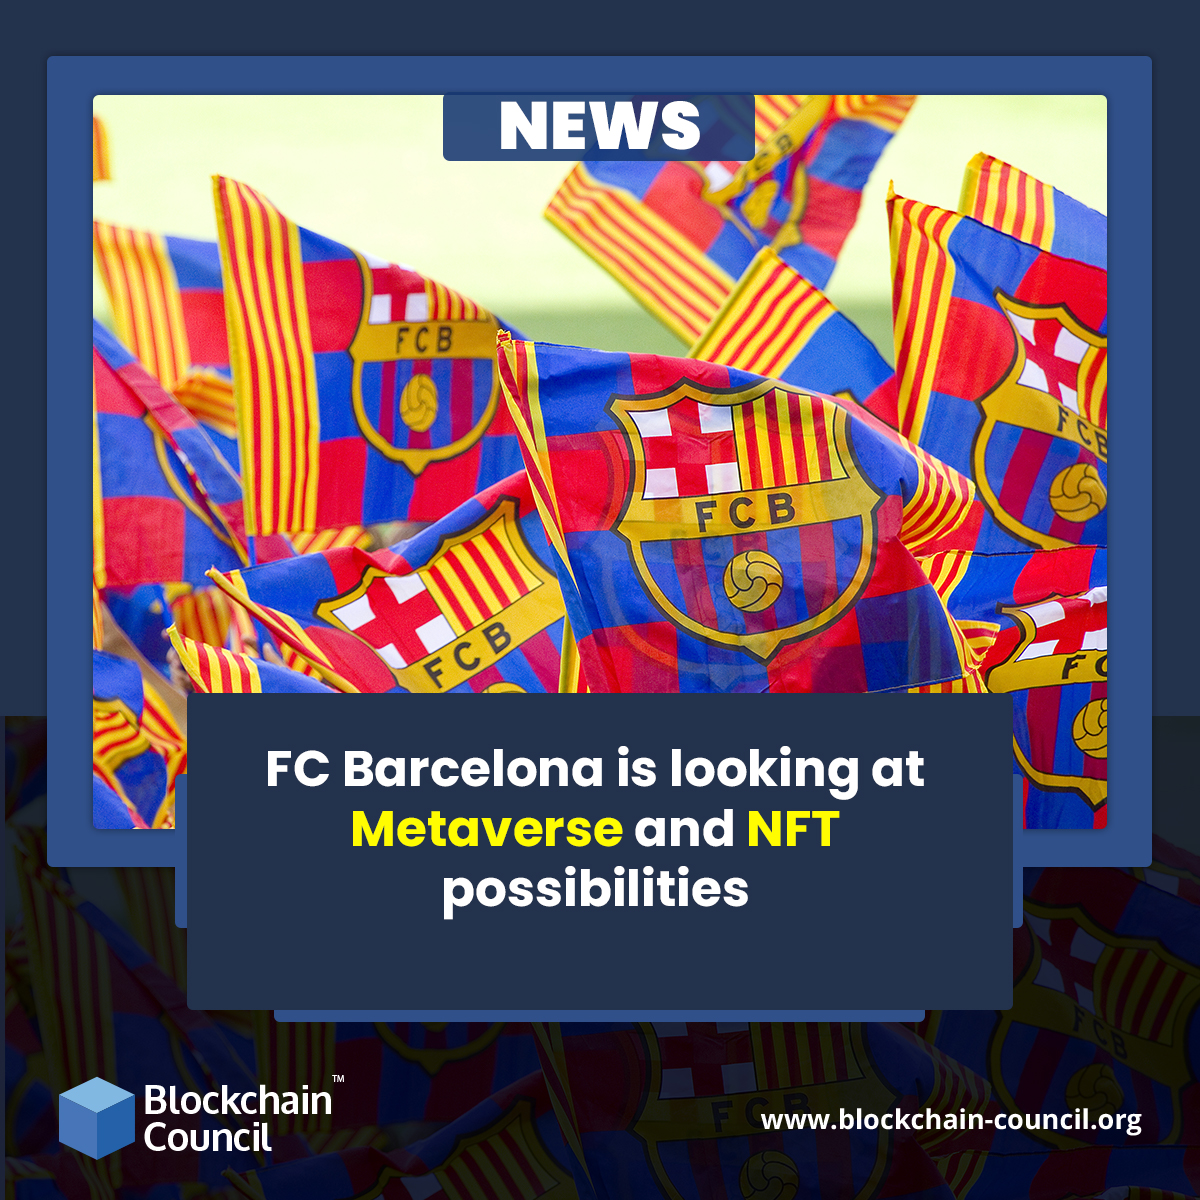 FC Barcelona is looking at Metaverse and NFT possibilities